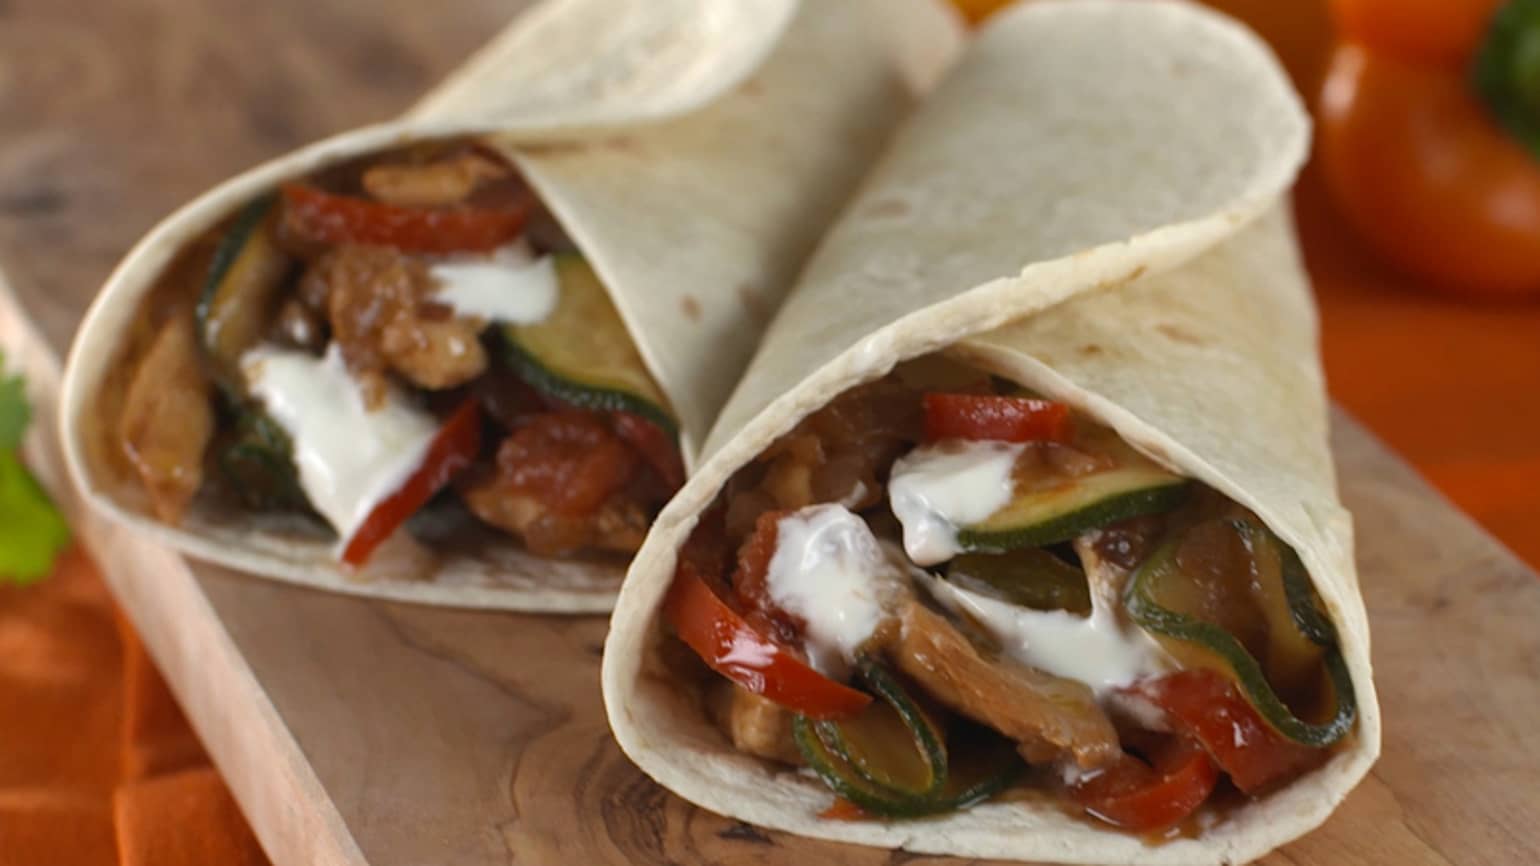 Old El Paso fajitas filled with chicken, courgette and sour cream